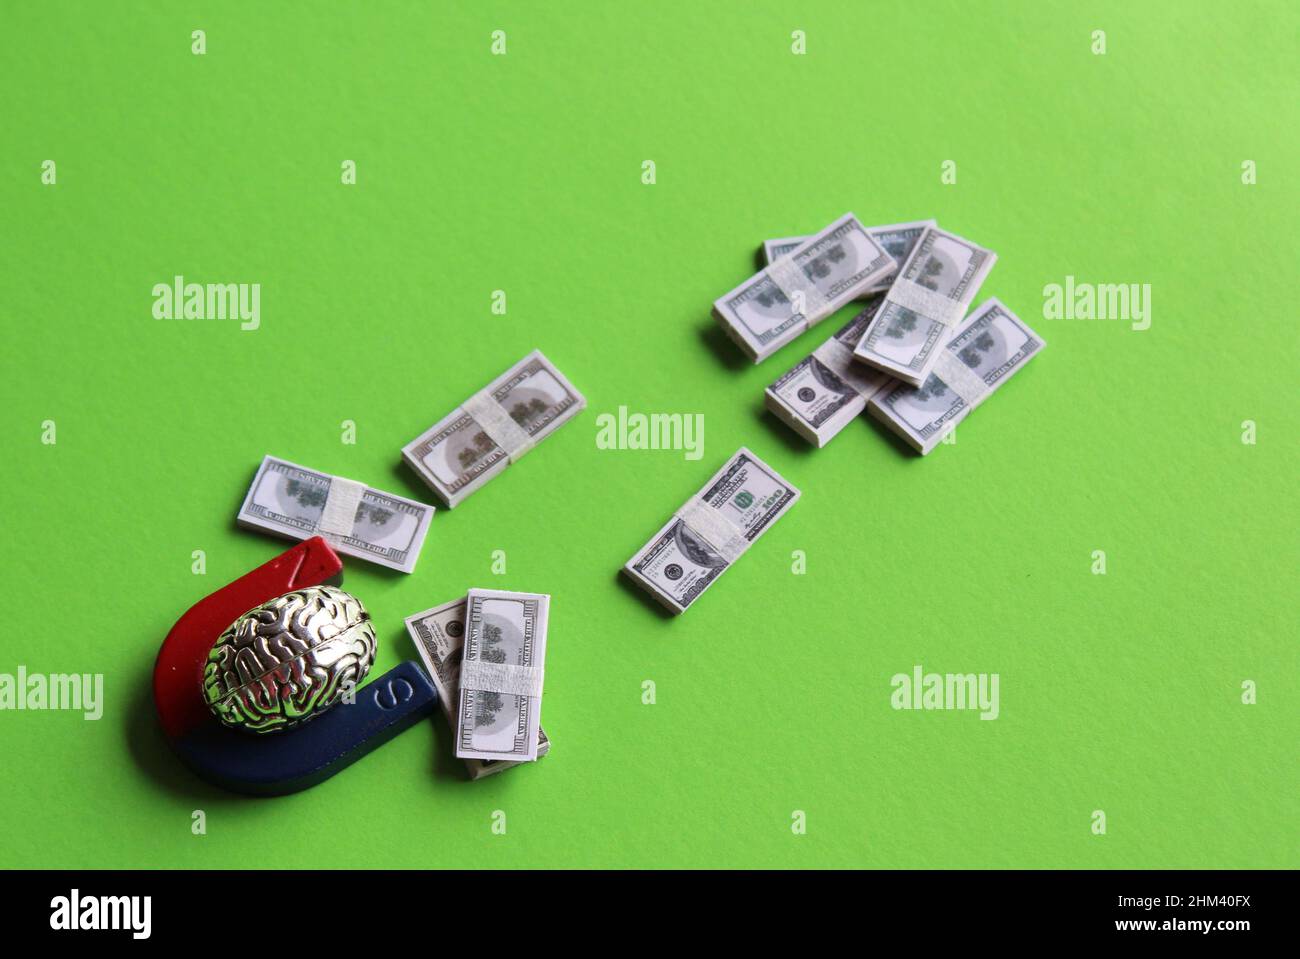 Business mindset, capitalism concept. Brain and magnet attract money on green background Stock Photo